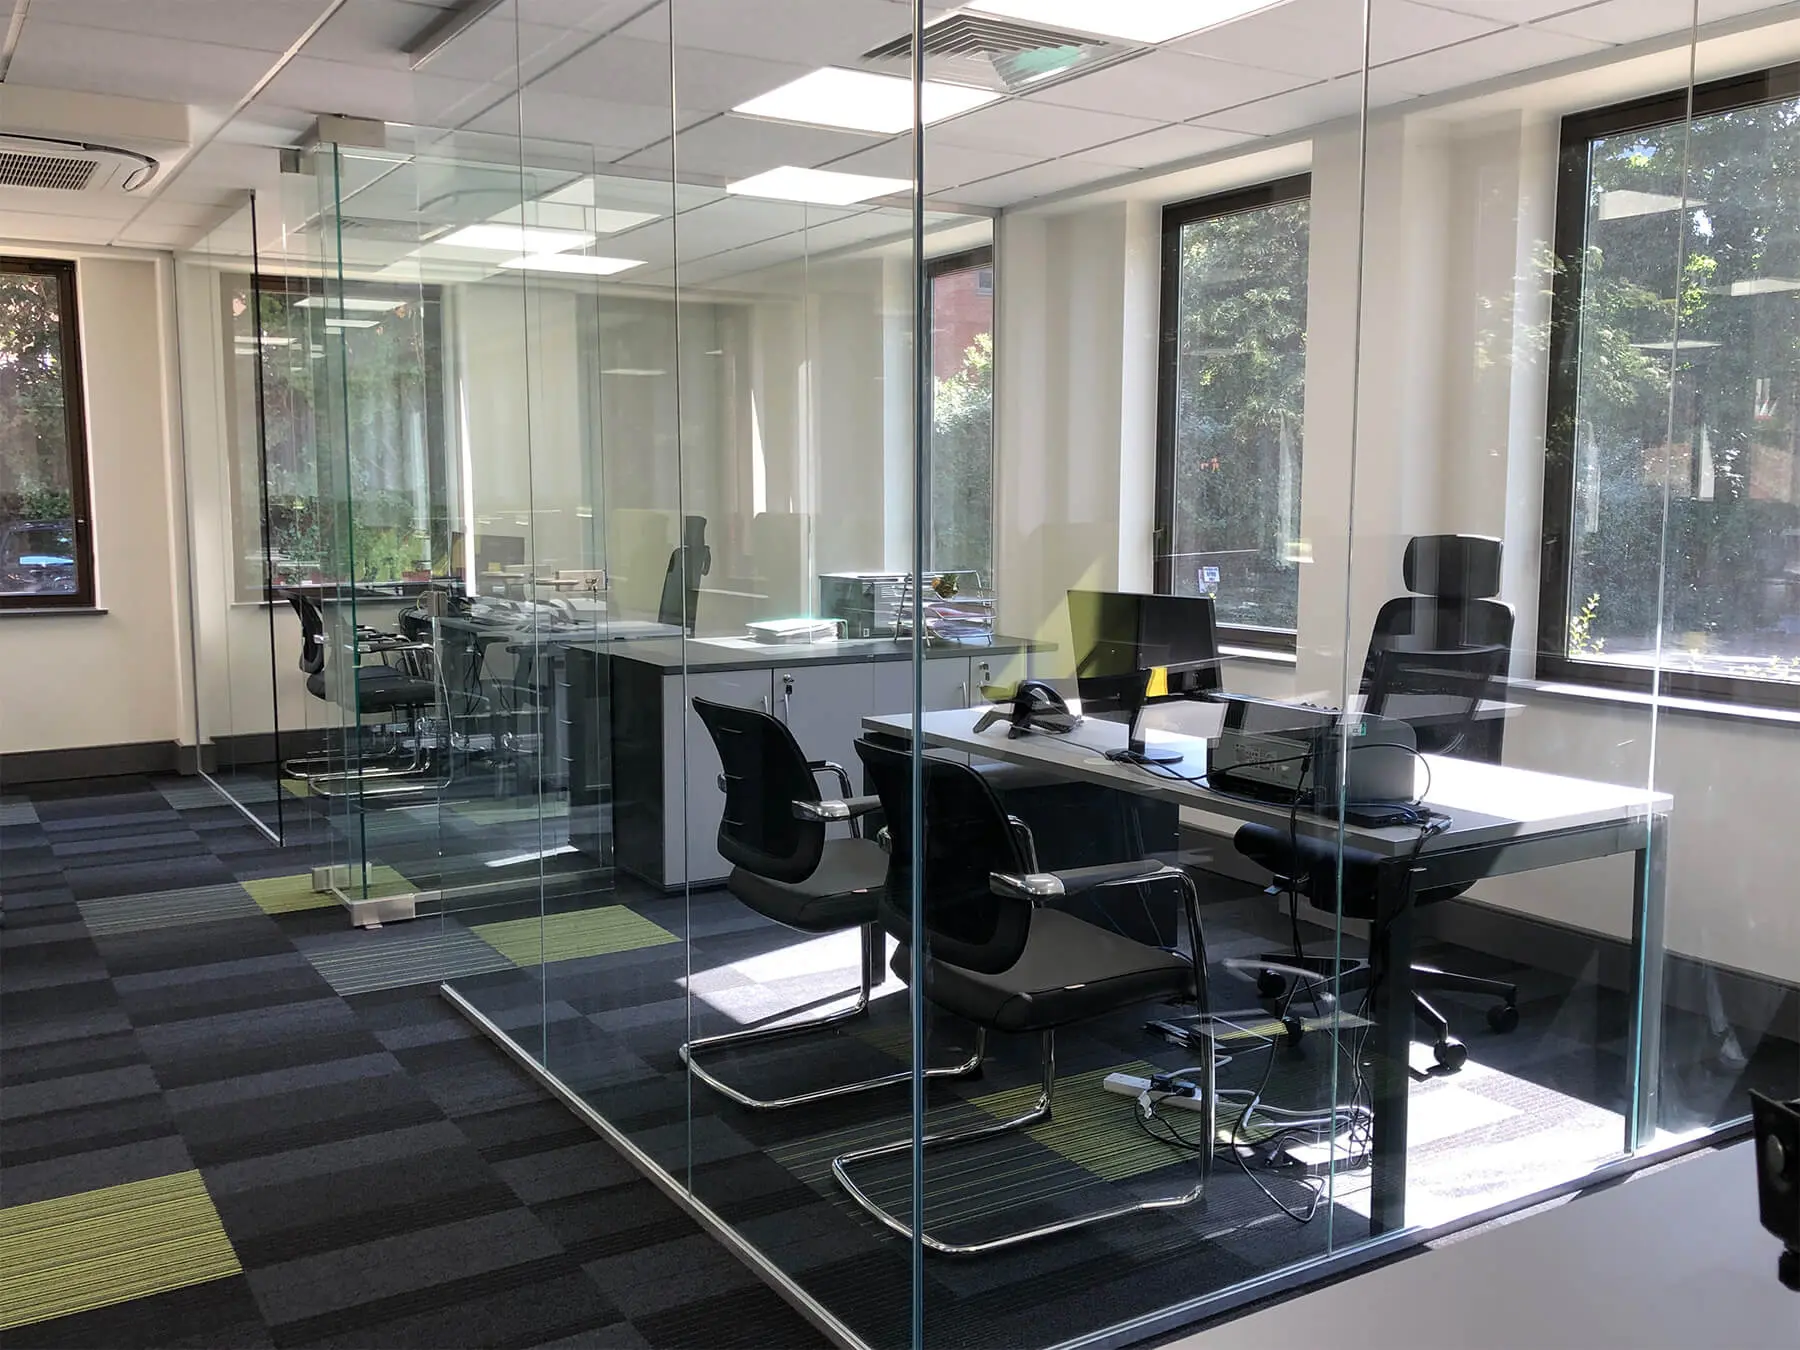 Glass partitioned work space with designer floors